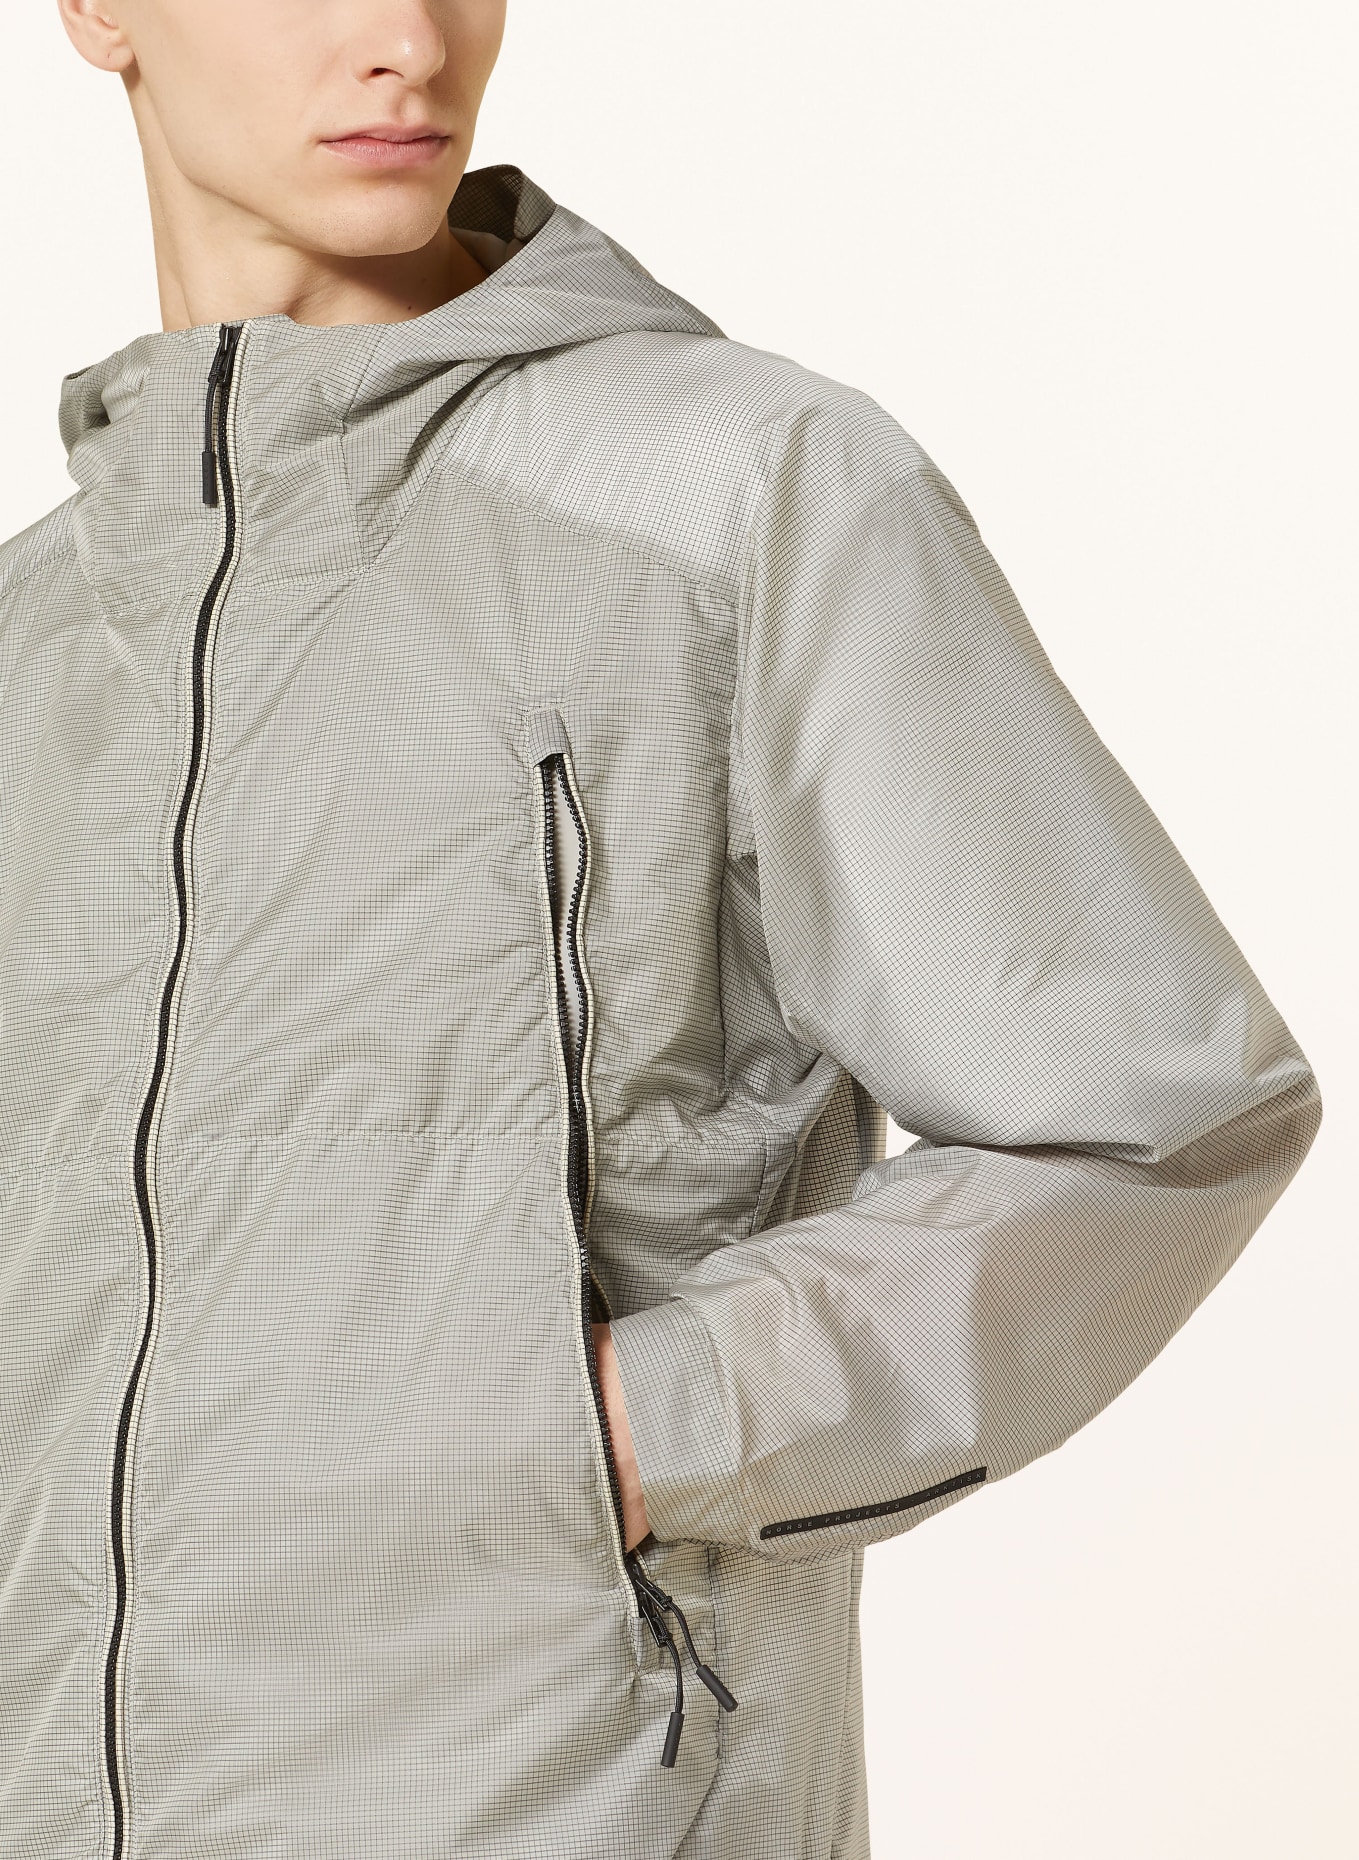 NORSE PROJECTS Wind breaker PASMO, Color: LIGHT GRAY/ GRAY (Image 5)